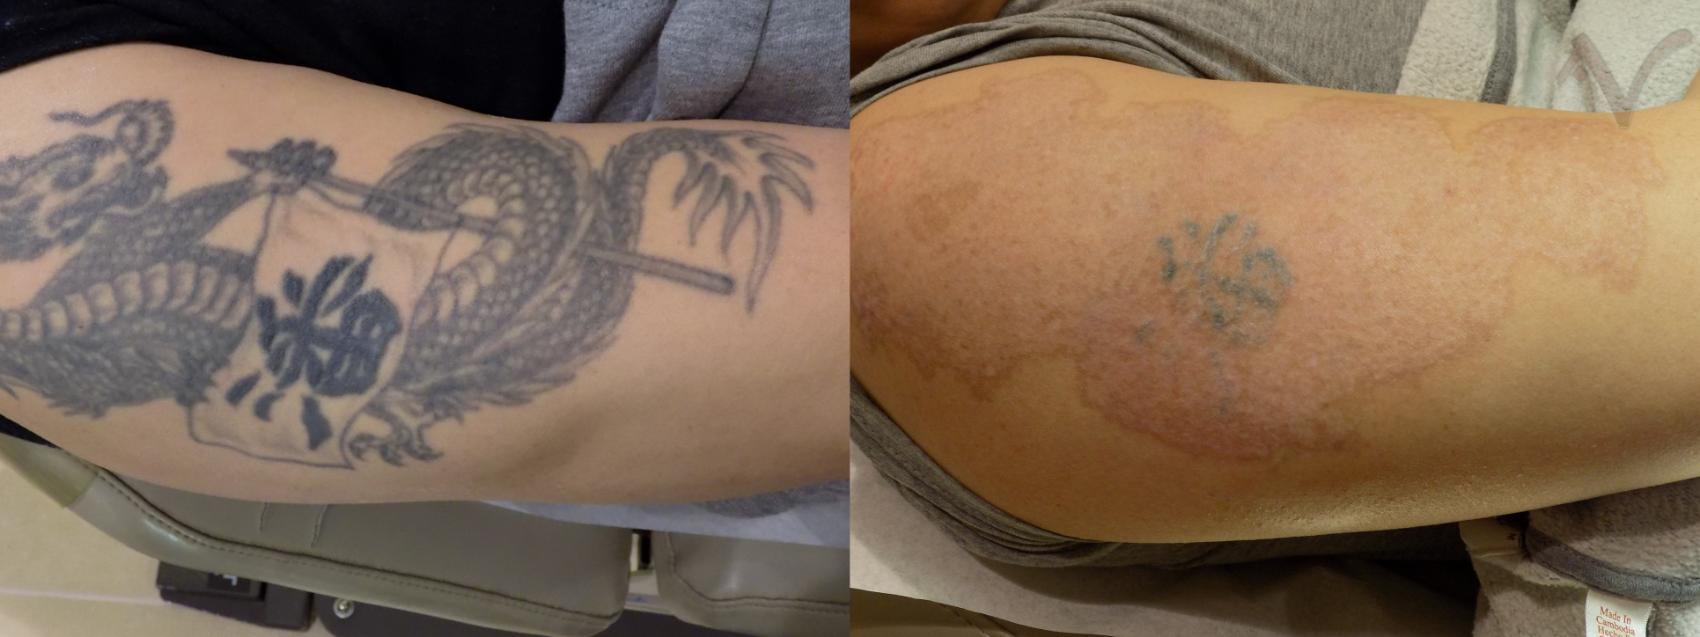 Laser Tattoo Removal and Laser Hair Removal Learning Center